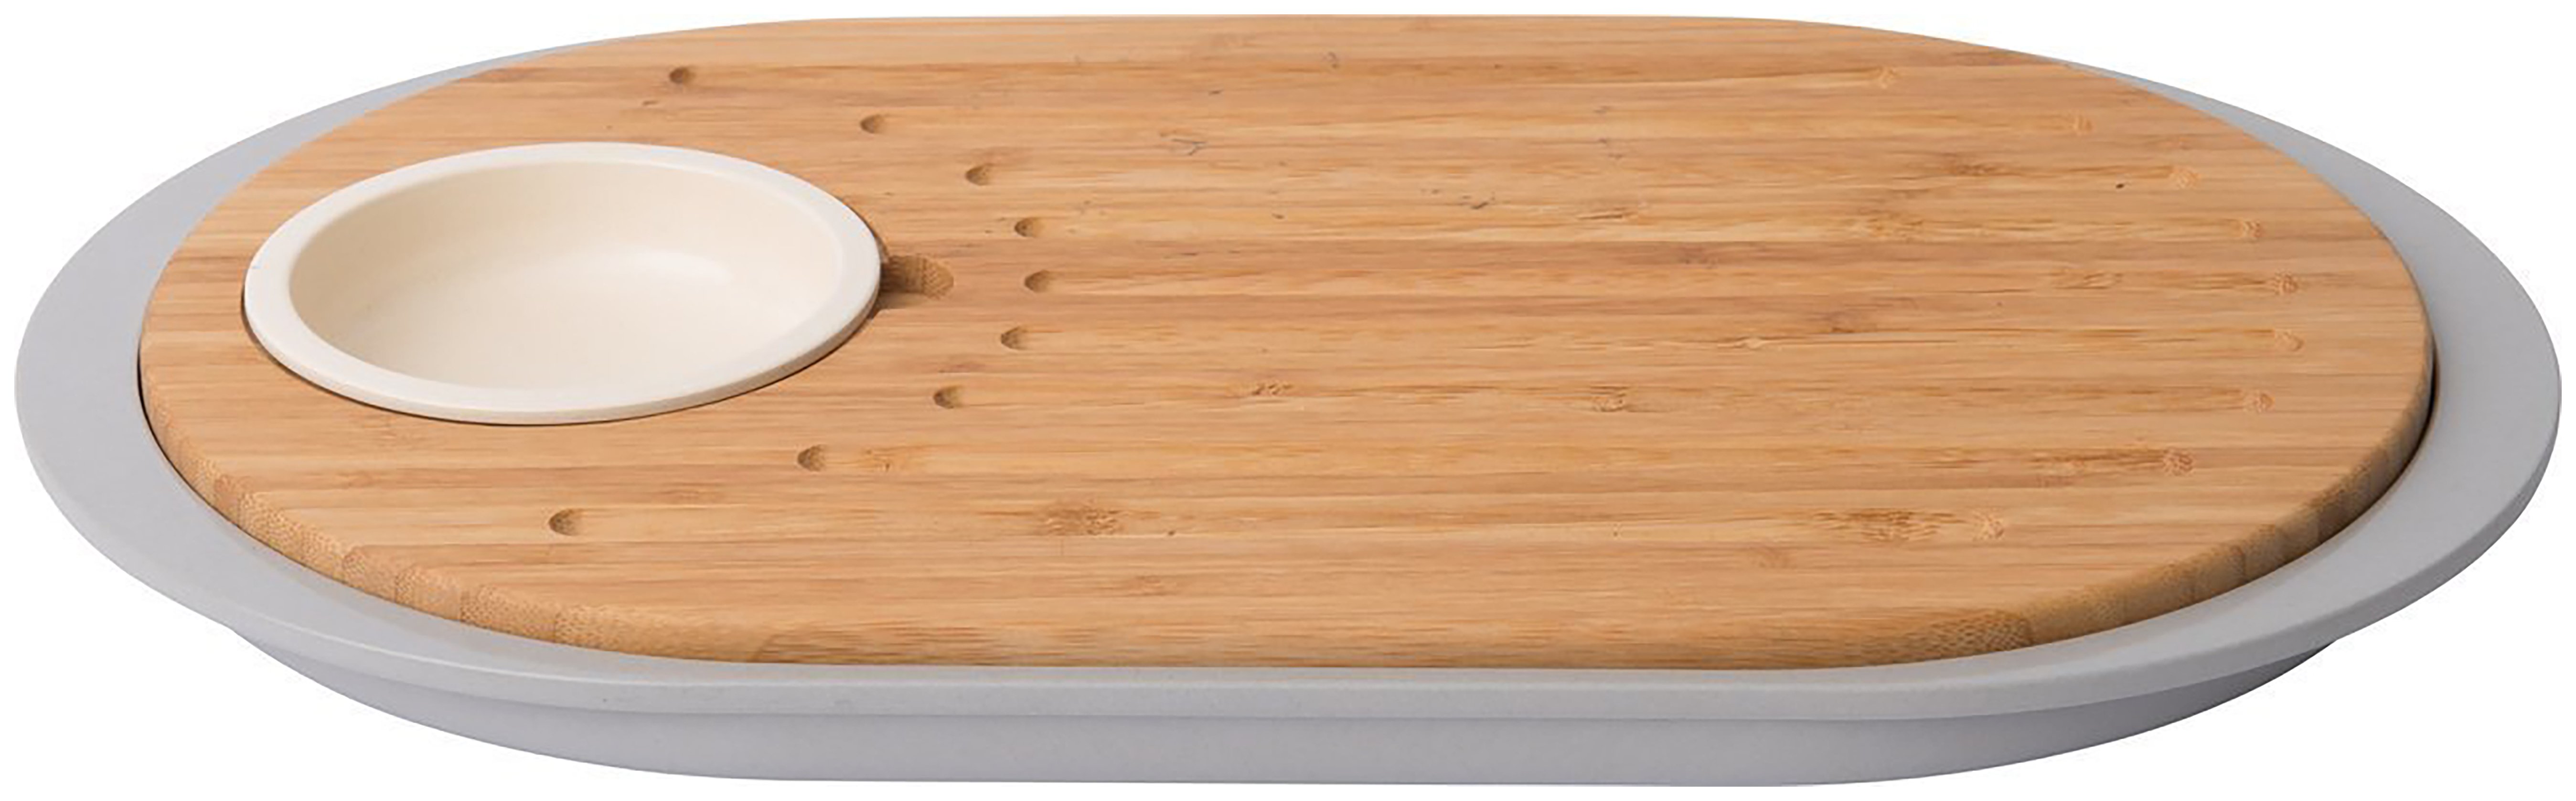 BergHOFF Leo 2 Sided Bamboo Tapas Board with Tray